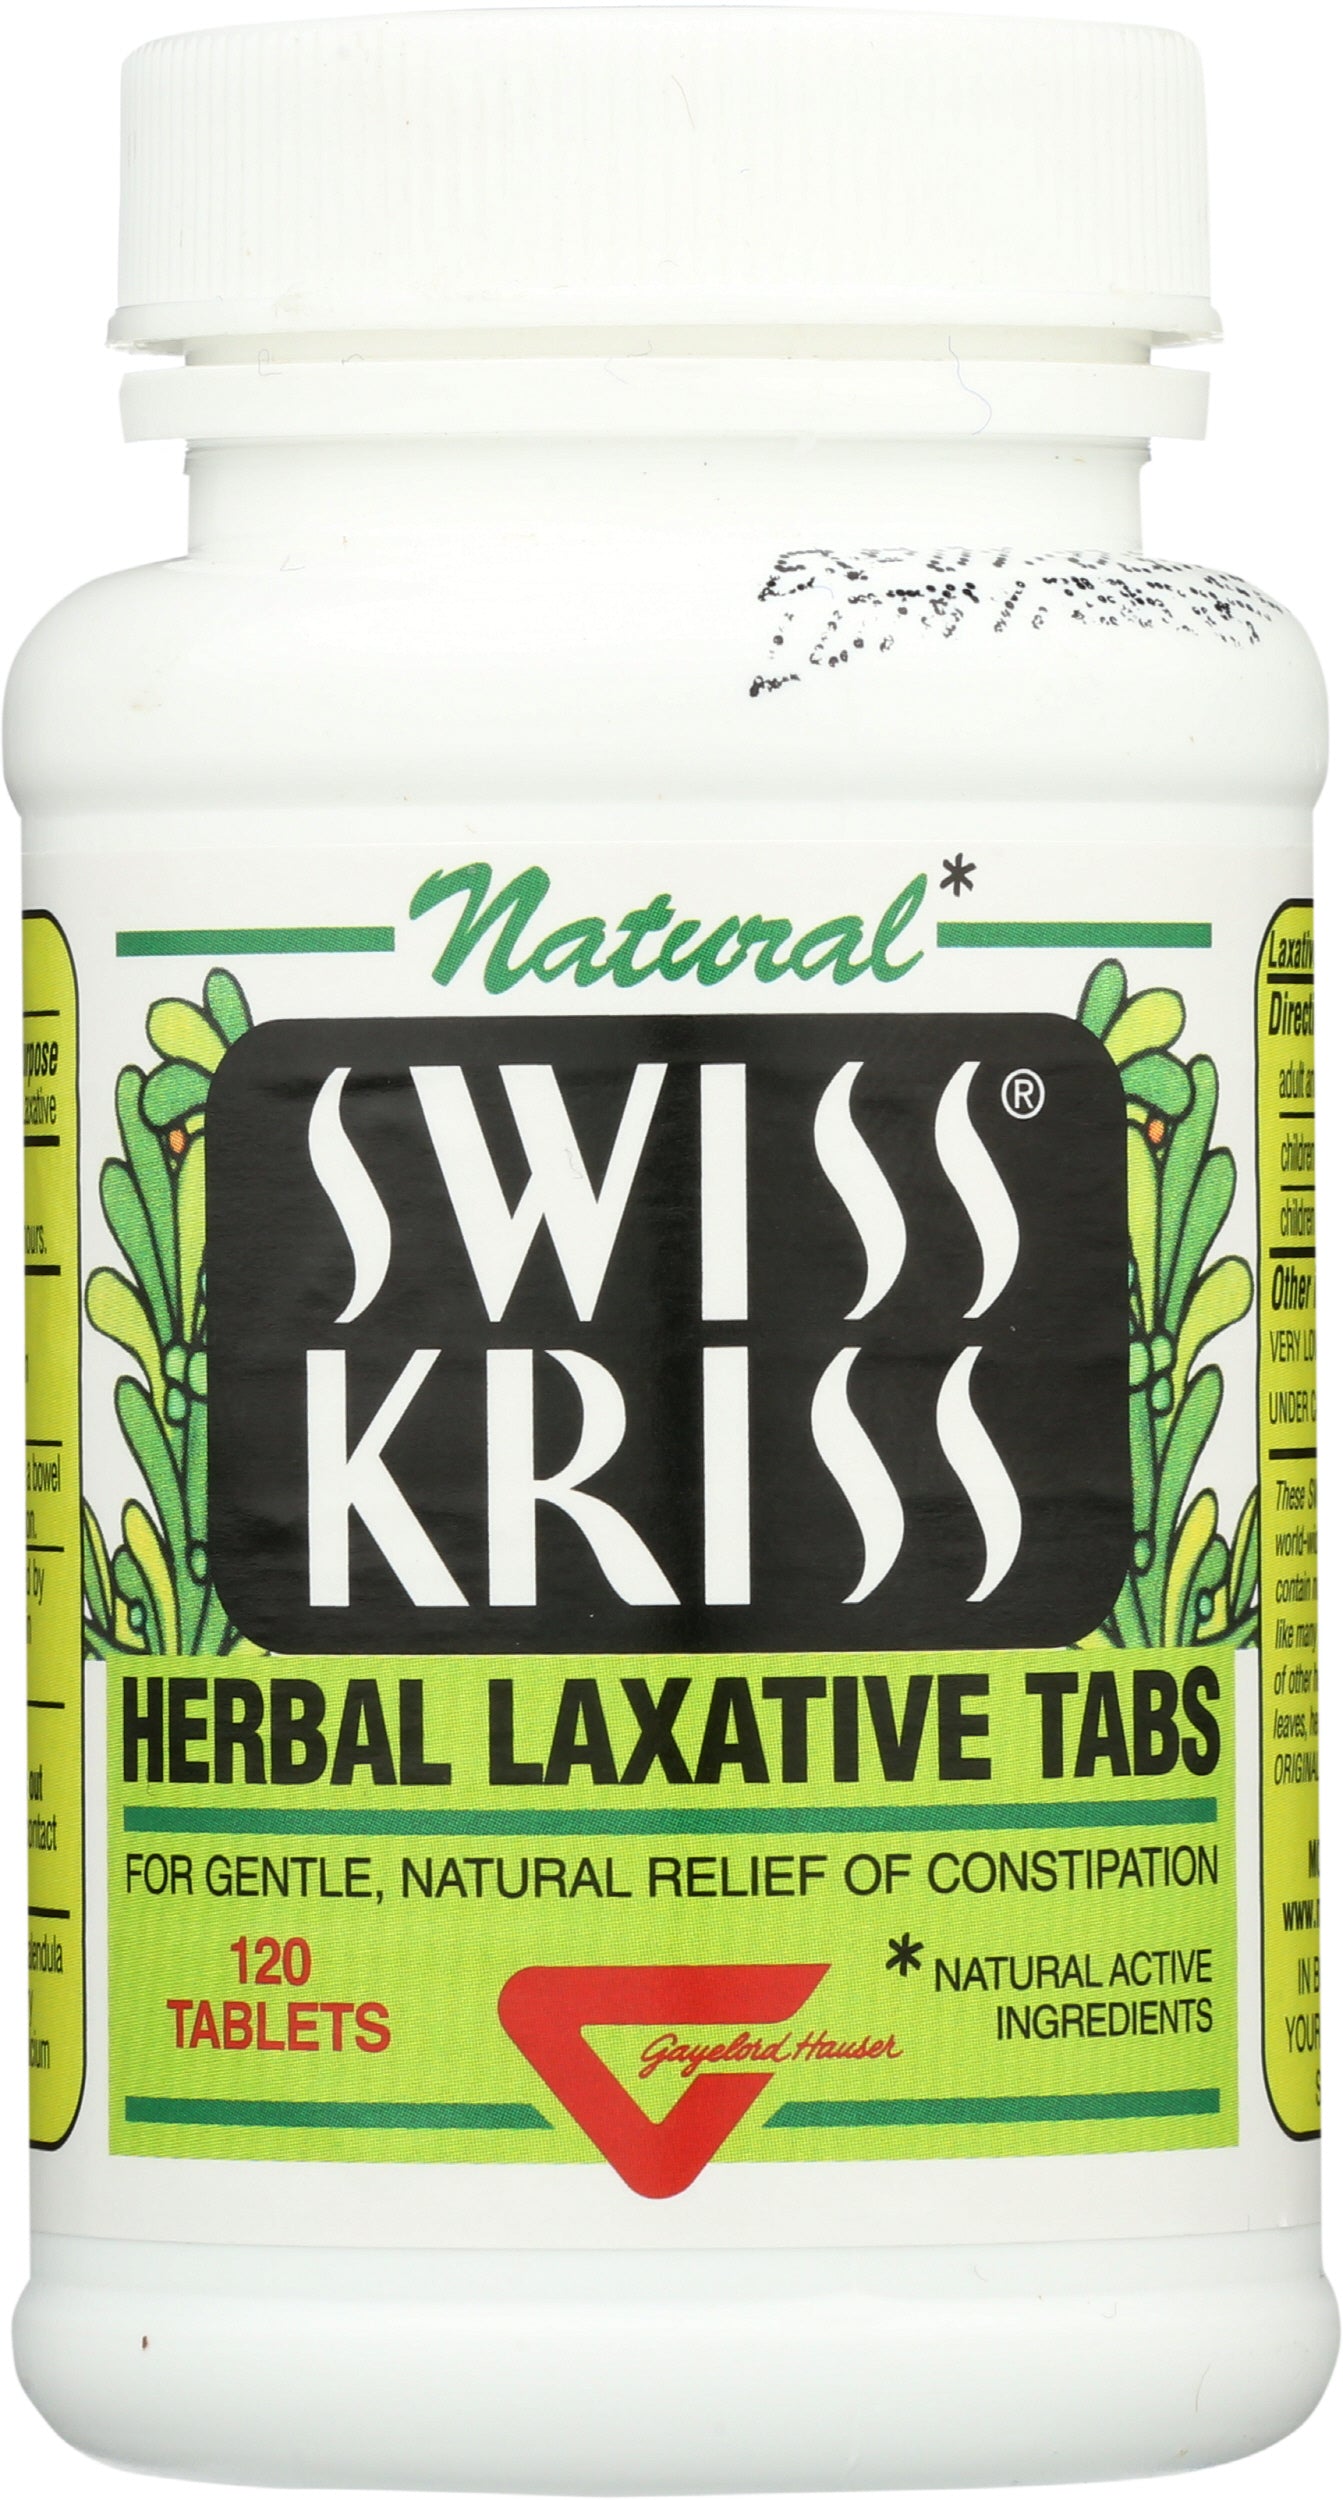 Swiss Kriss Herbal Laxative 120 Tablets Front